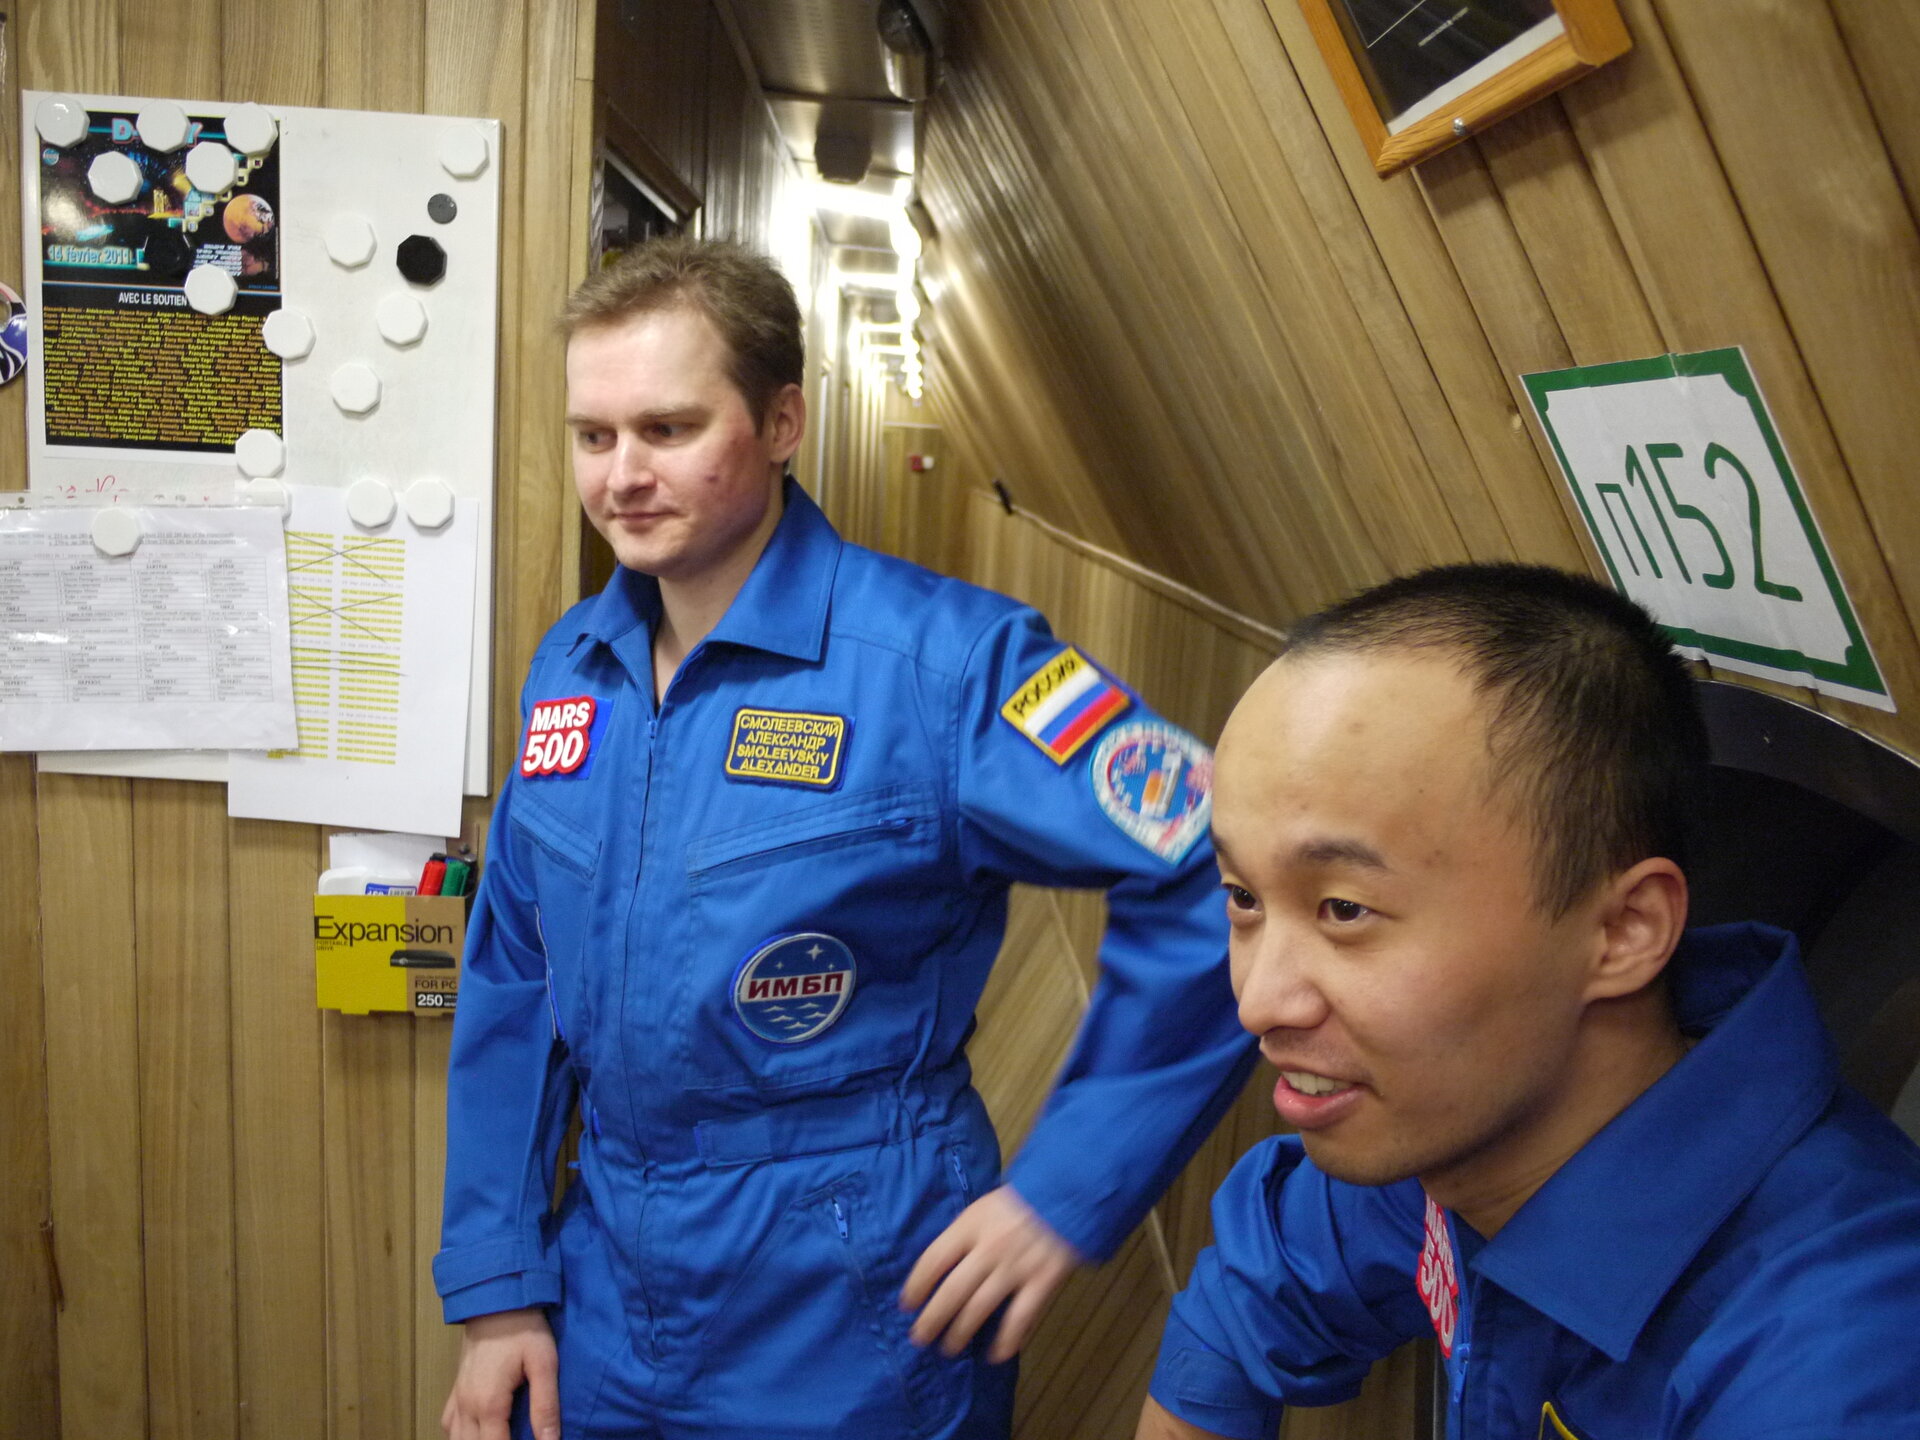 Alexandr and Wang back in the orbital modules